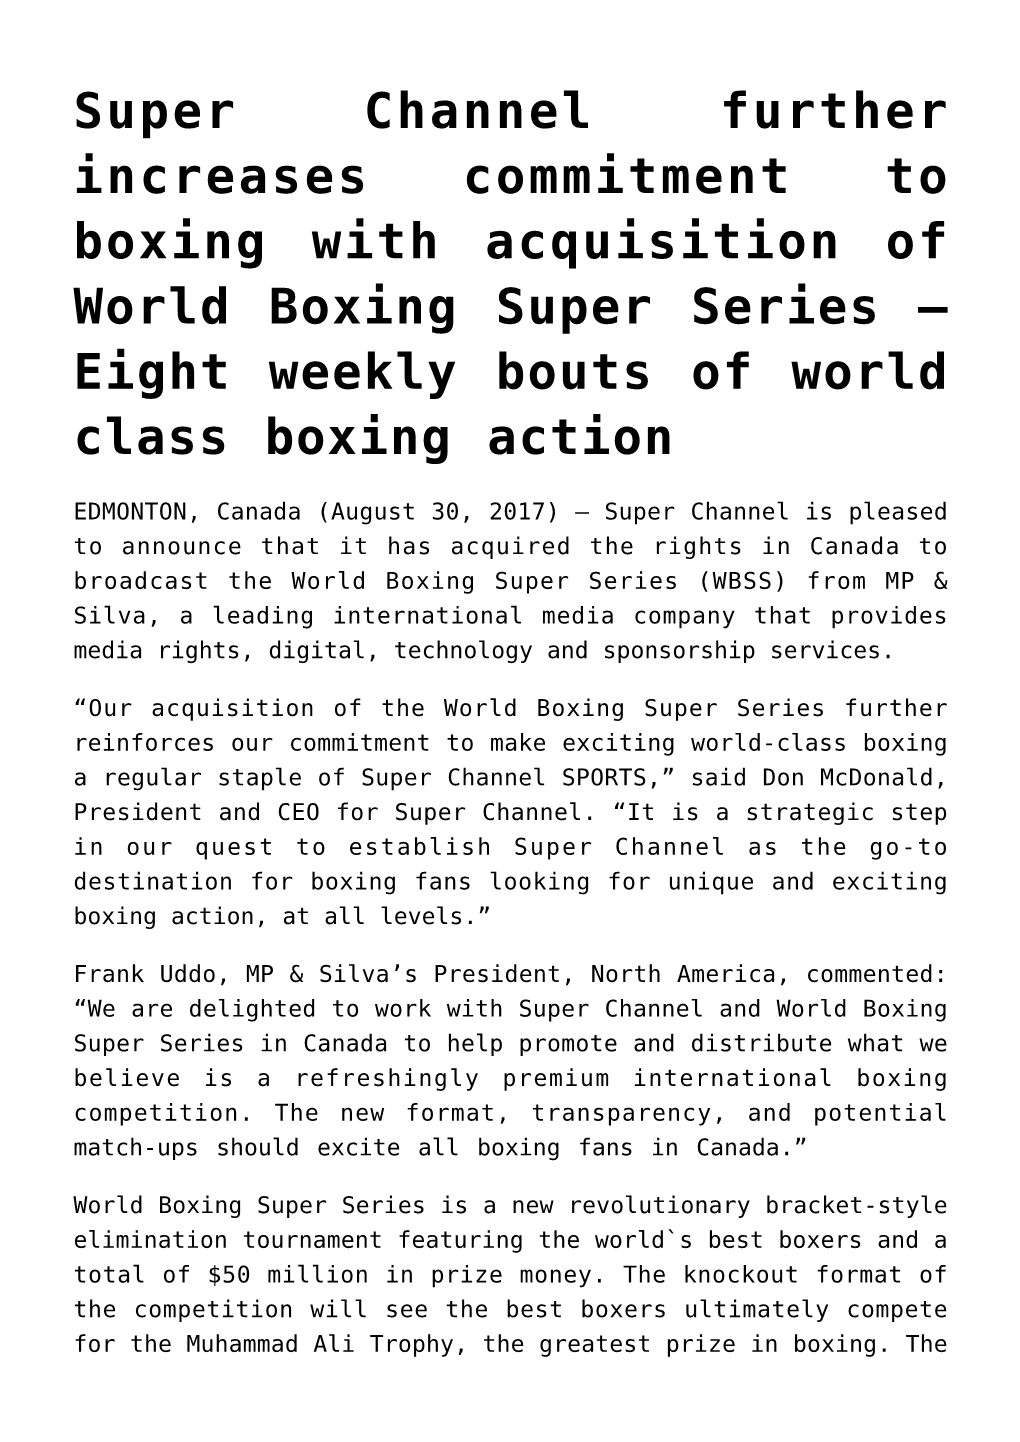 Super Channel Further Increases Commitment to Boxing with Acquisition of World Boxing Super Series – Eight Weekly Bouts of World Class Boxing Action